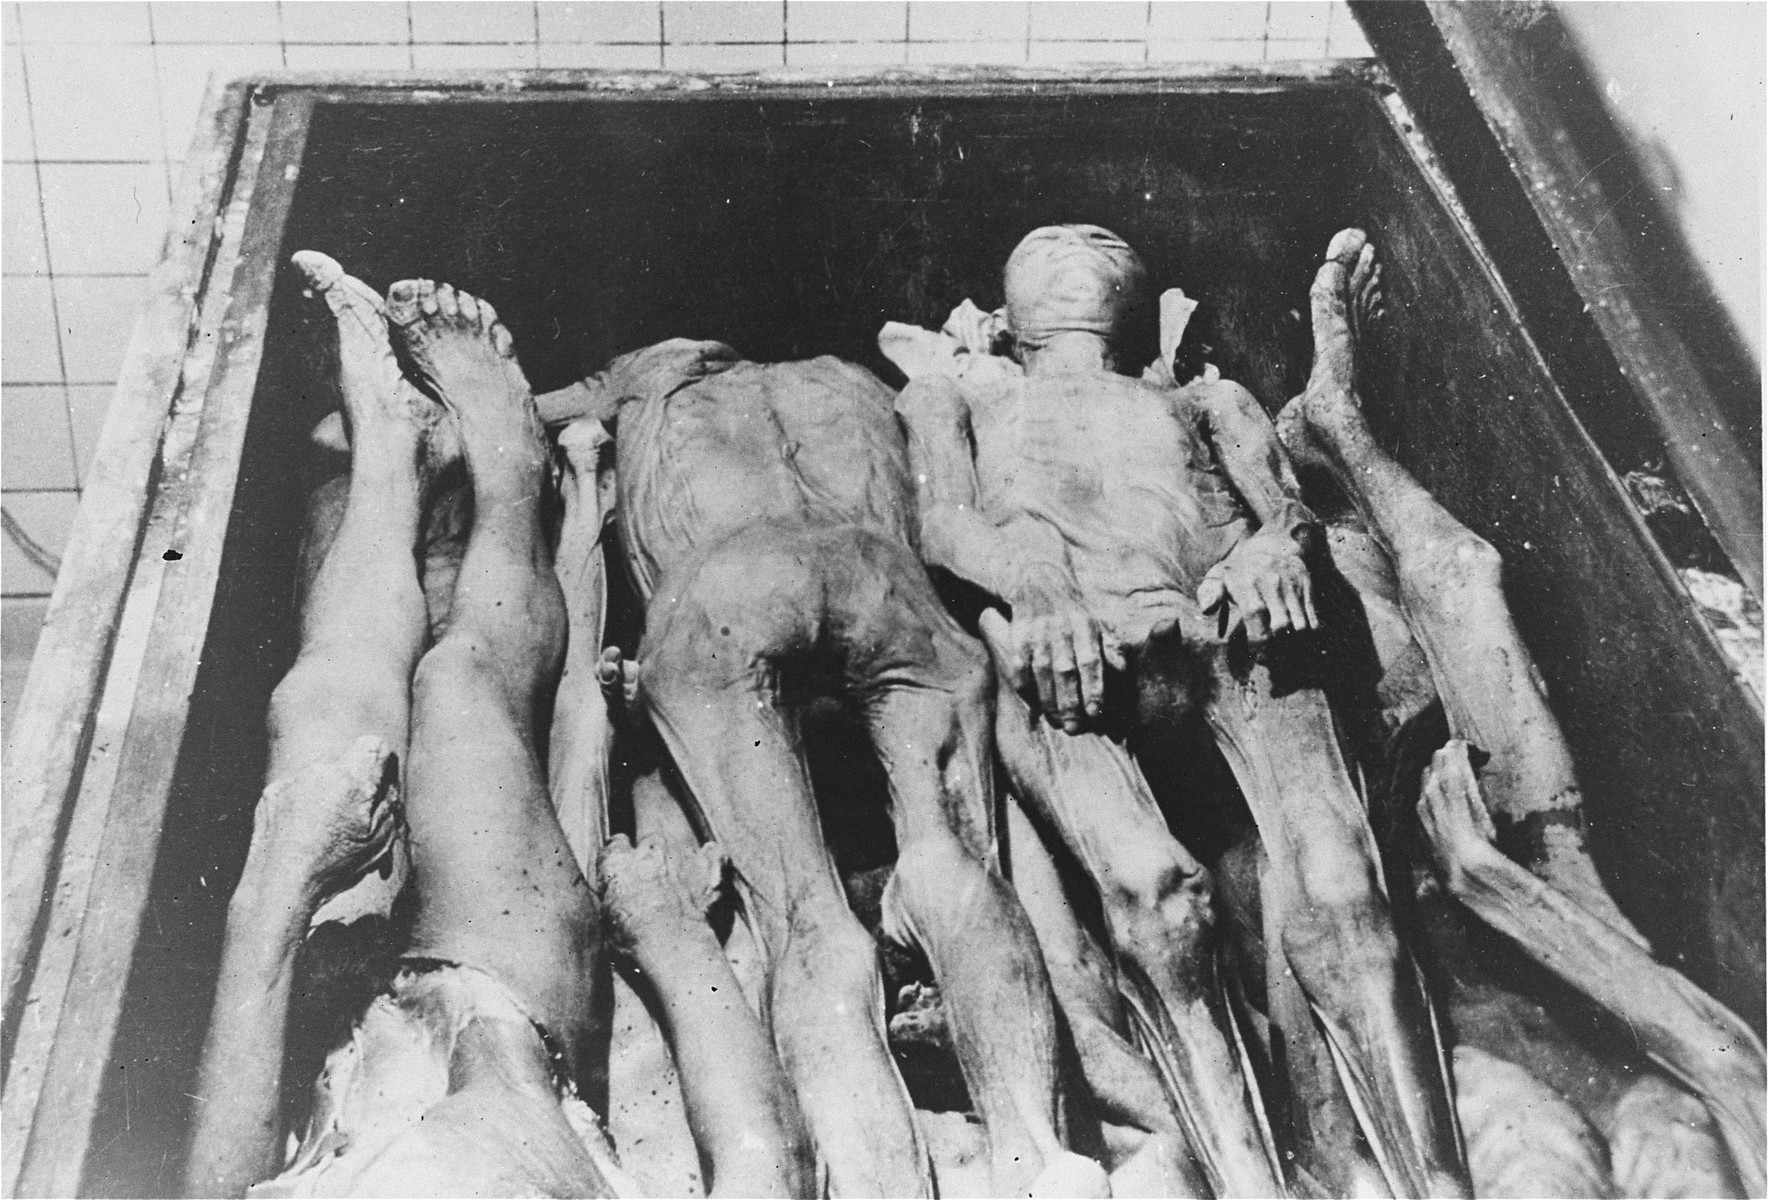 The corpses of Jewish prisoners in a vat filled with alcohol at the Strasbourg University Anatomical Institute.

At the end of August,1943, eighty-six Jews, including 30 women, were gassed in Natzweiler-Struthof for the purpose of constructing a collection of skulls and skeletons to be kept at the Strasbourg University Institute of Anatomy, under the directorship of August Hirt.  The individuals were "selected" at Auschwitz for their special bone structure and transferred to Natzweiler, where SS Captain Josef Kramer, the commandant of the camp, oversaw the operation.  The corpses then remained in vats of alcohol for over a year, the project envisioned by Hirt having never been completed.  When Allied forces approached Strasbourg in November 1944, SS administrators were unaware that evidence of the crime still existed at the Institute, and only at the last minute ordered the bodies destroyed.  This operation failed, however, and 16-17 of the bodies fell into Allied hands. [Klarsfeld, S., ed. The Struthof Album, 1985]